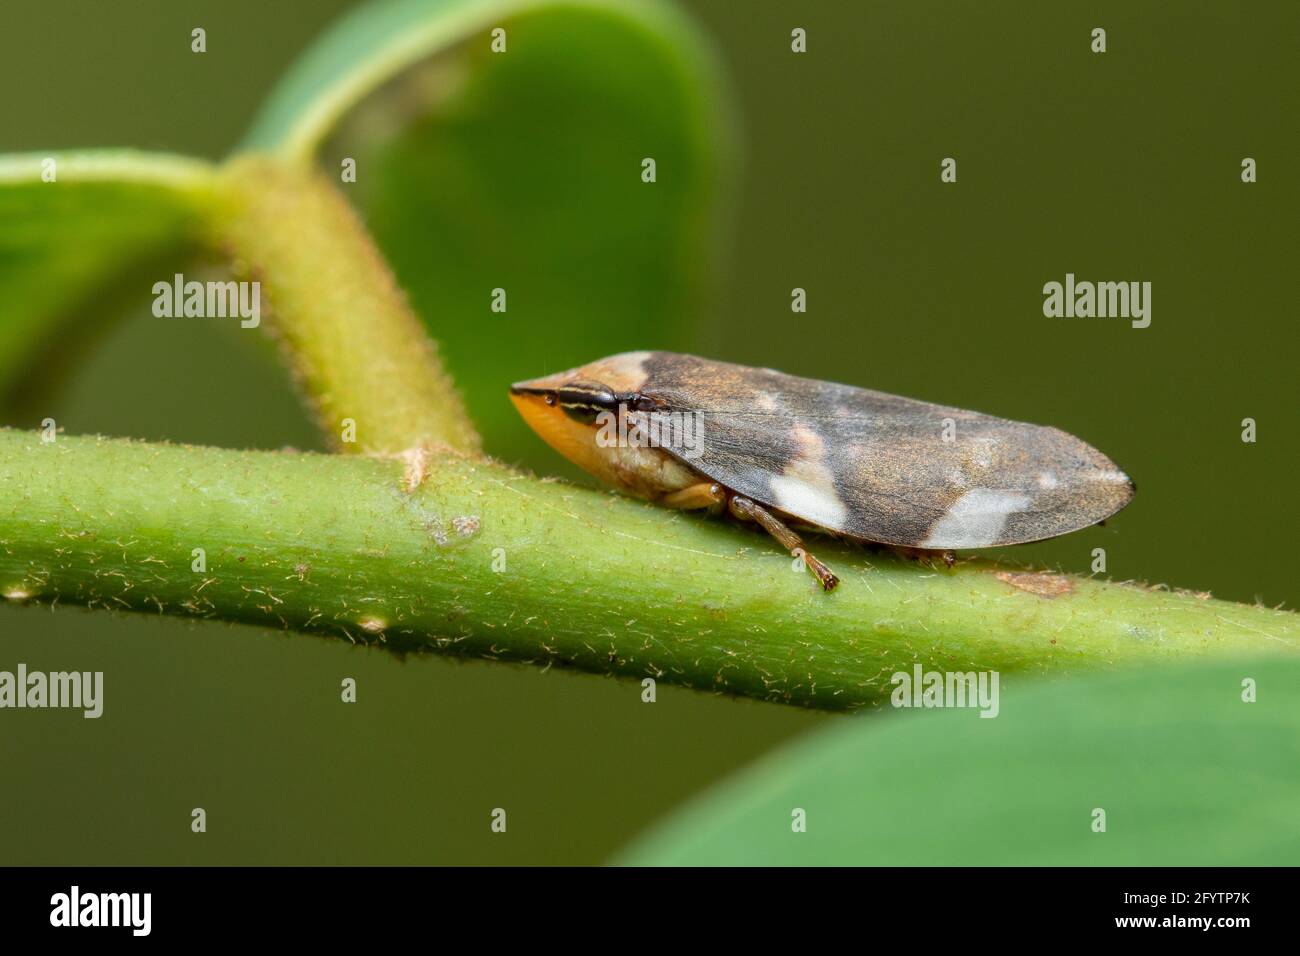 Image of brown leafhopper on natural background. Insect. Animal. Stock Photo